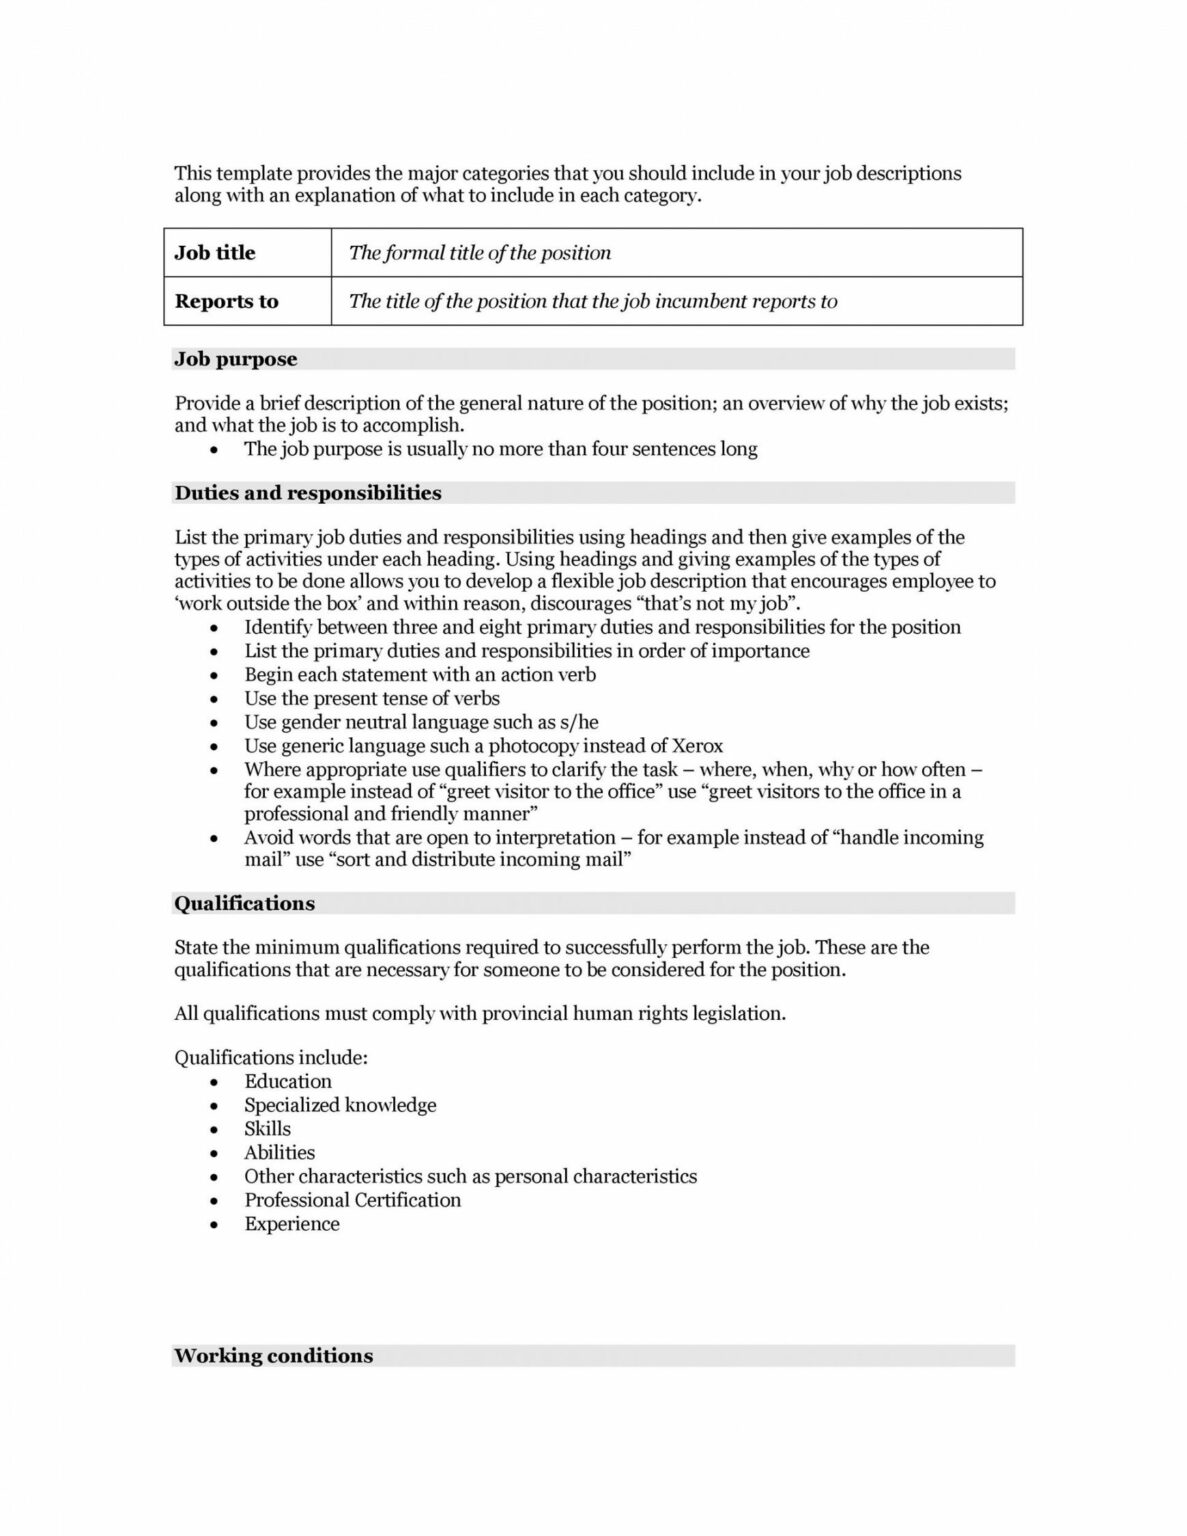 Professional Competency Based Job Description Template Word Sample